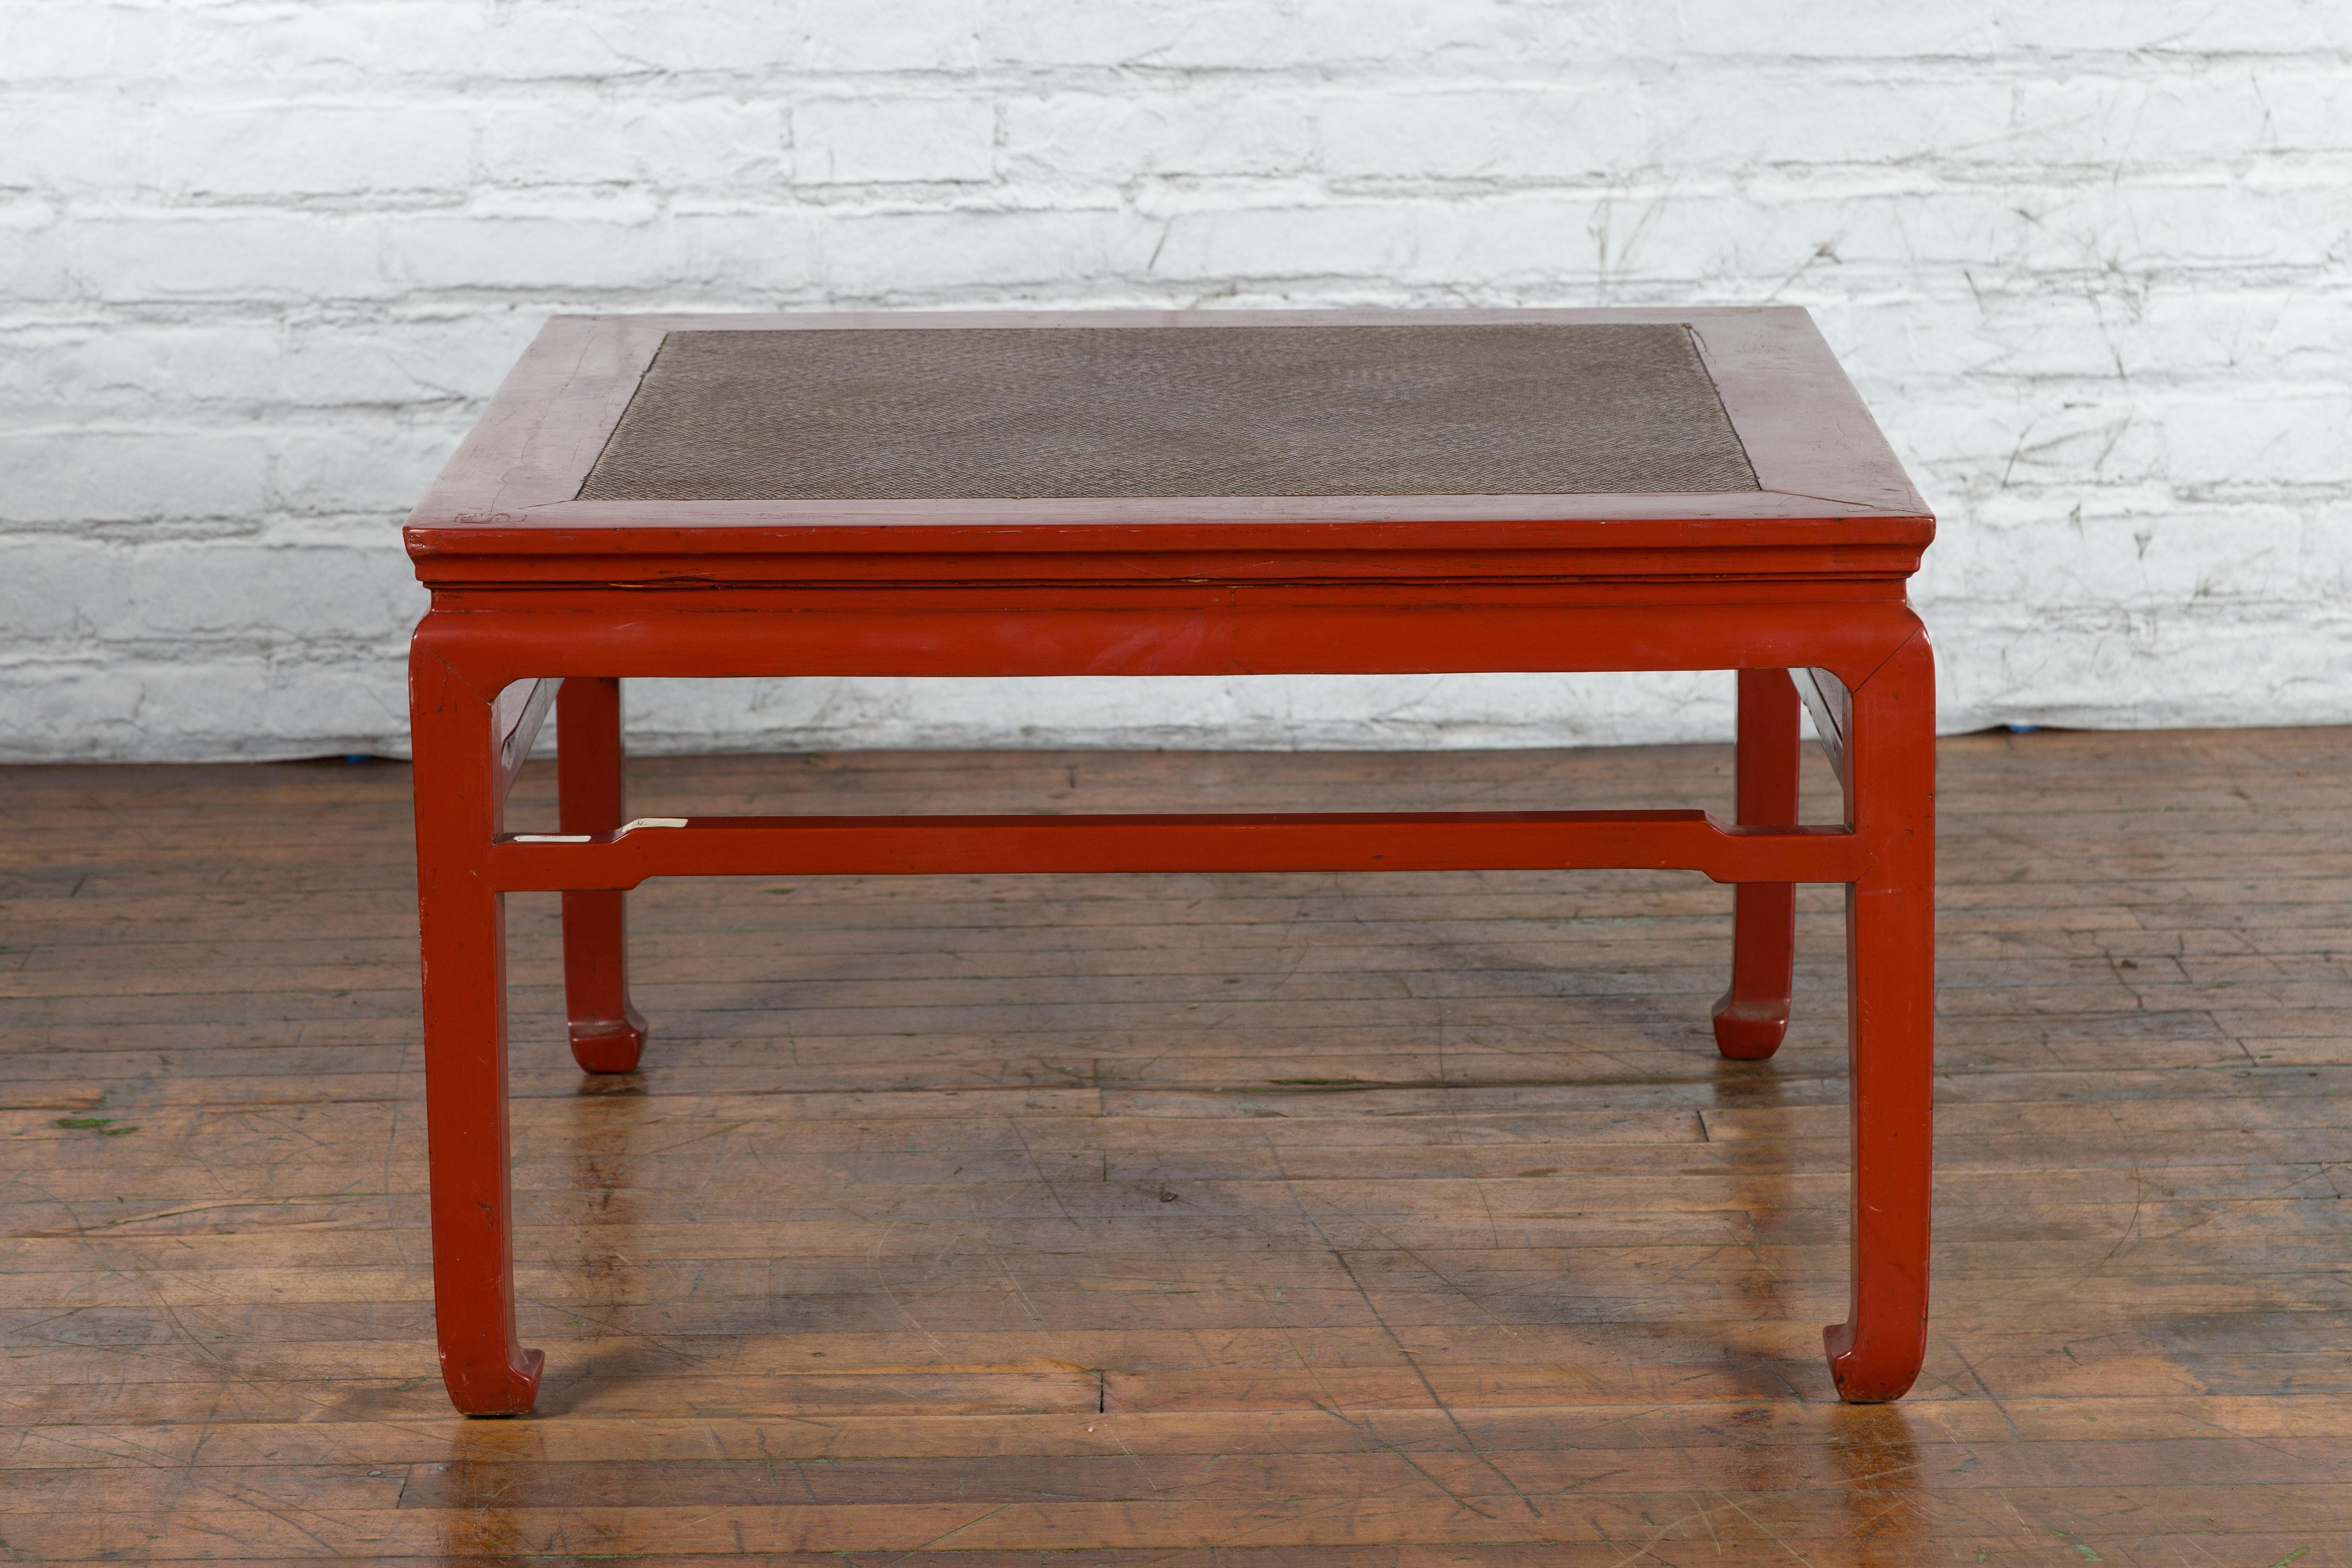 Chinese Early 20th Century Red Lacquer Coffee Table with Hand-Woven Rattan Top For Sale 7